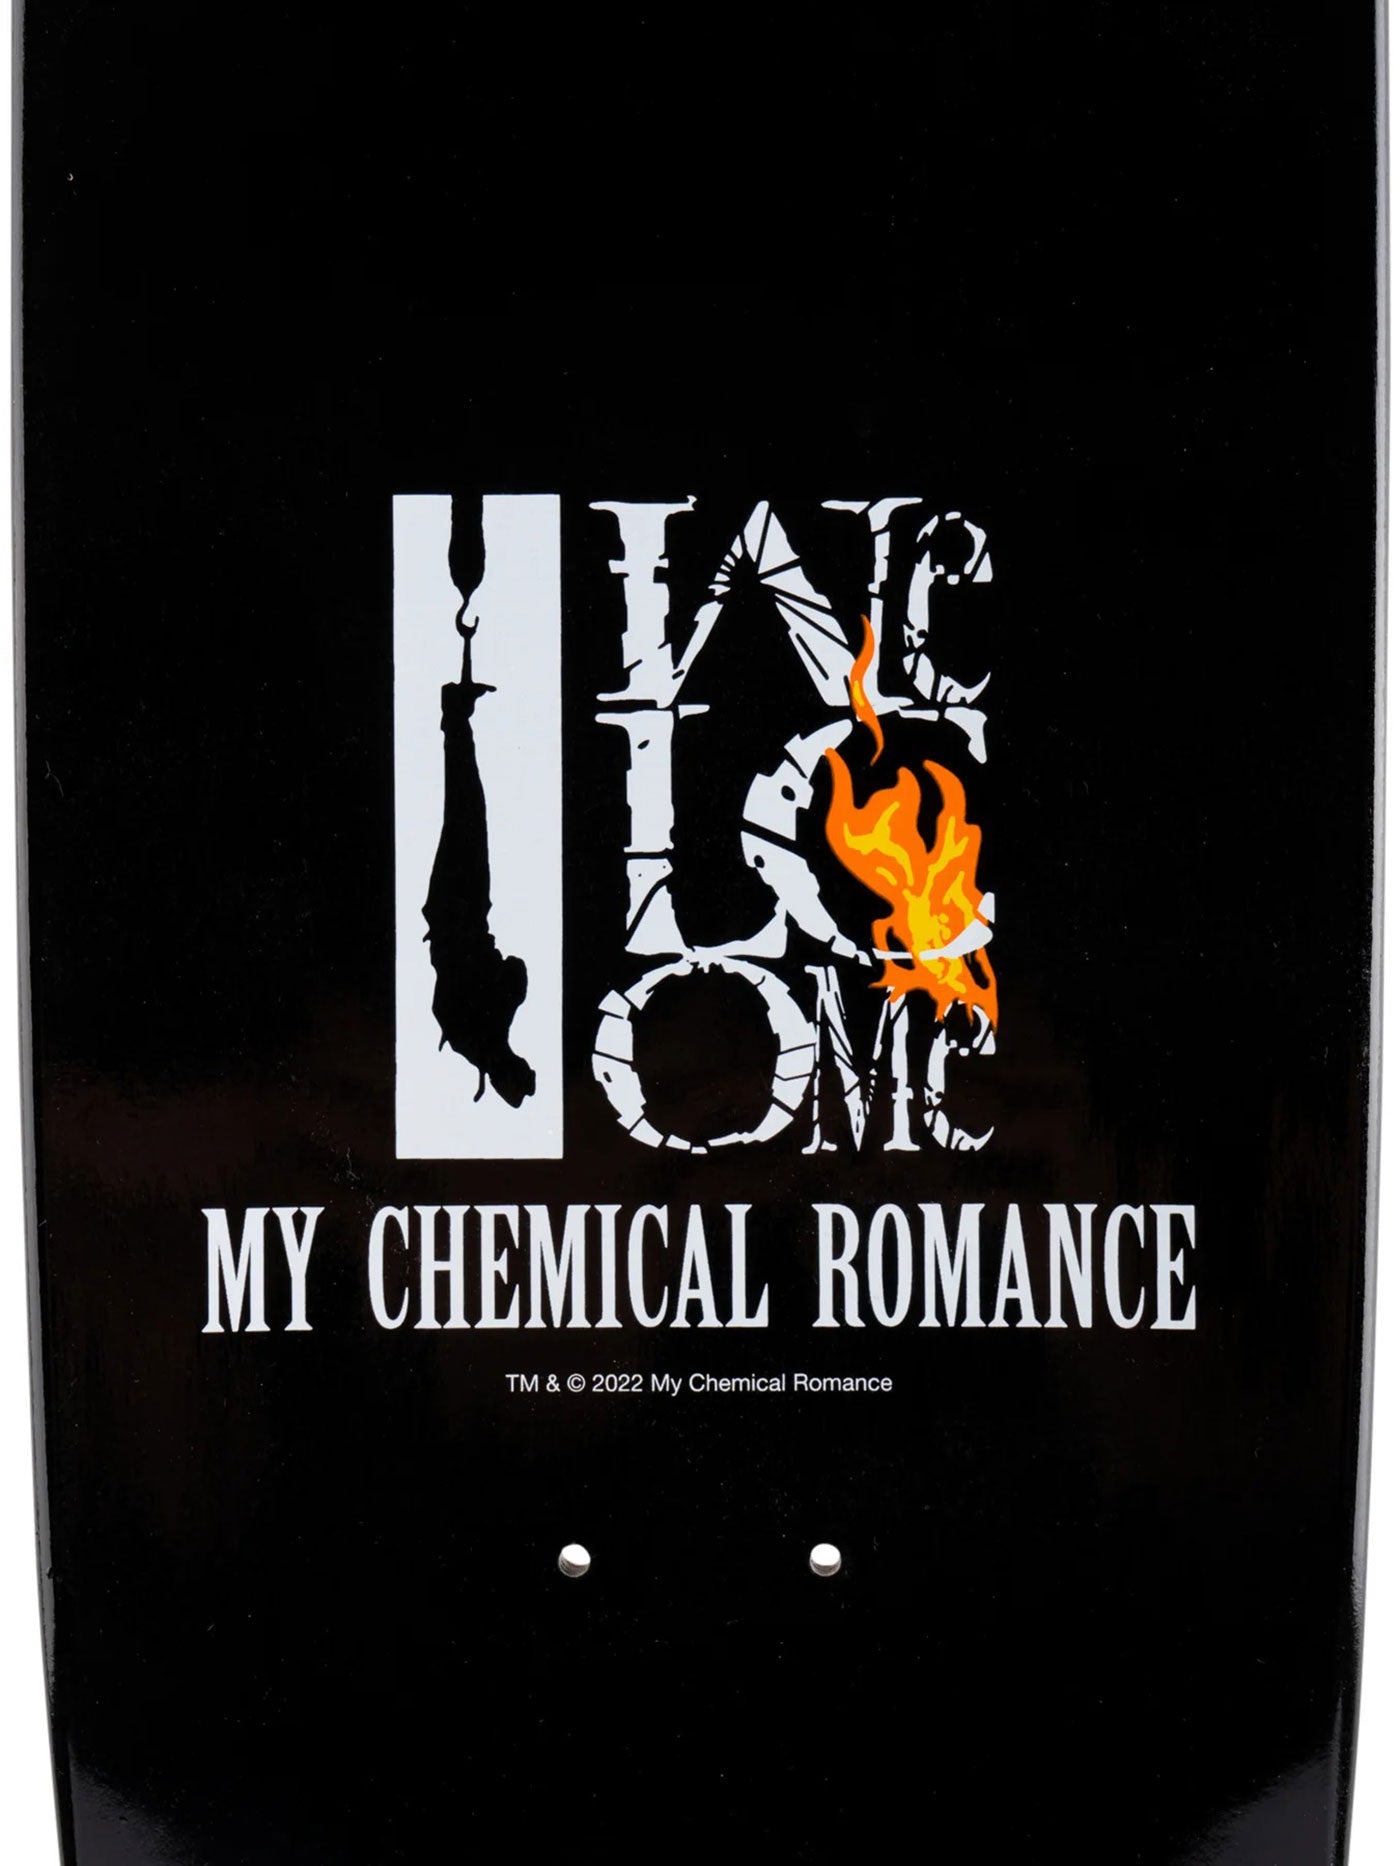 Welcome x My Chemical Romance My Bullets 8.8 Skateboard Deck